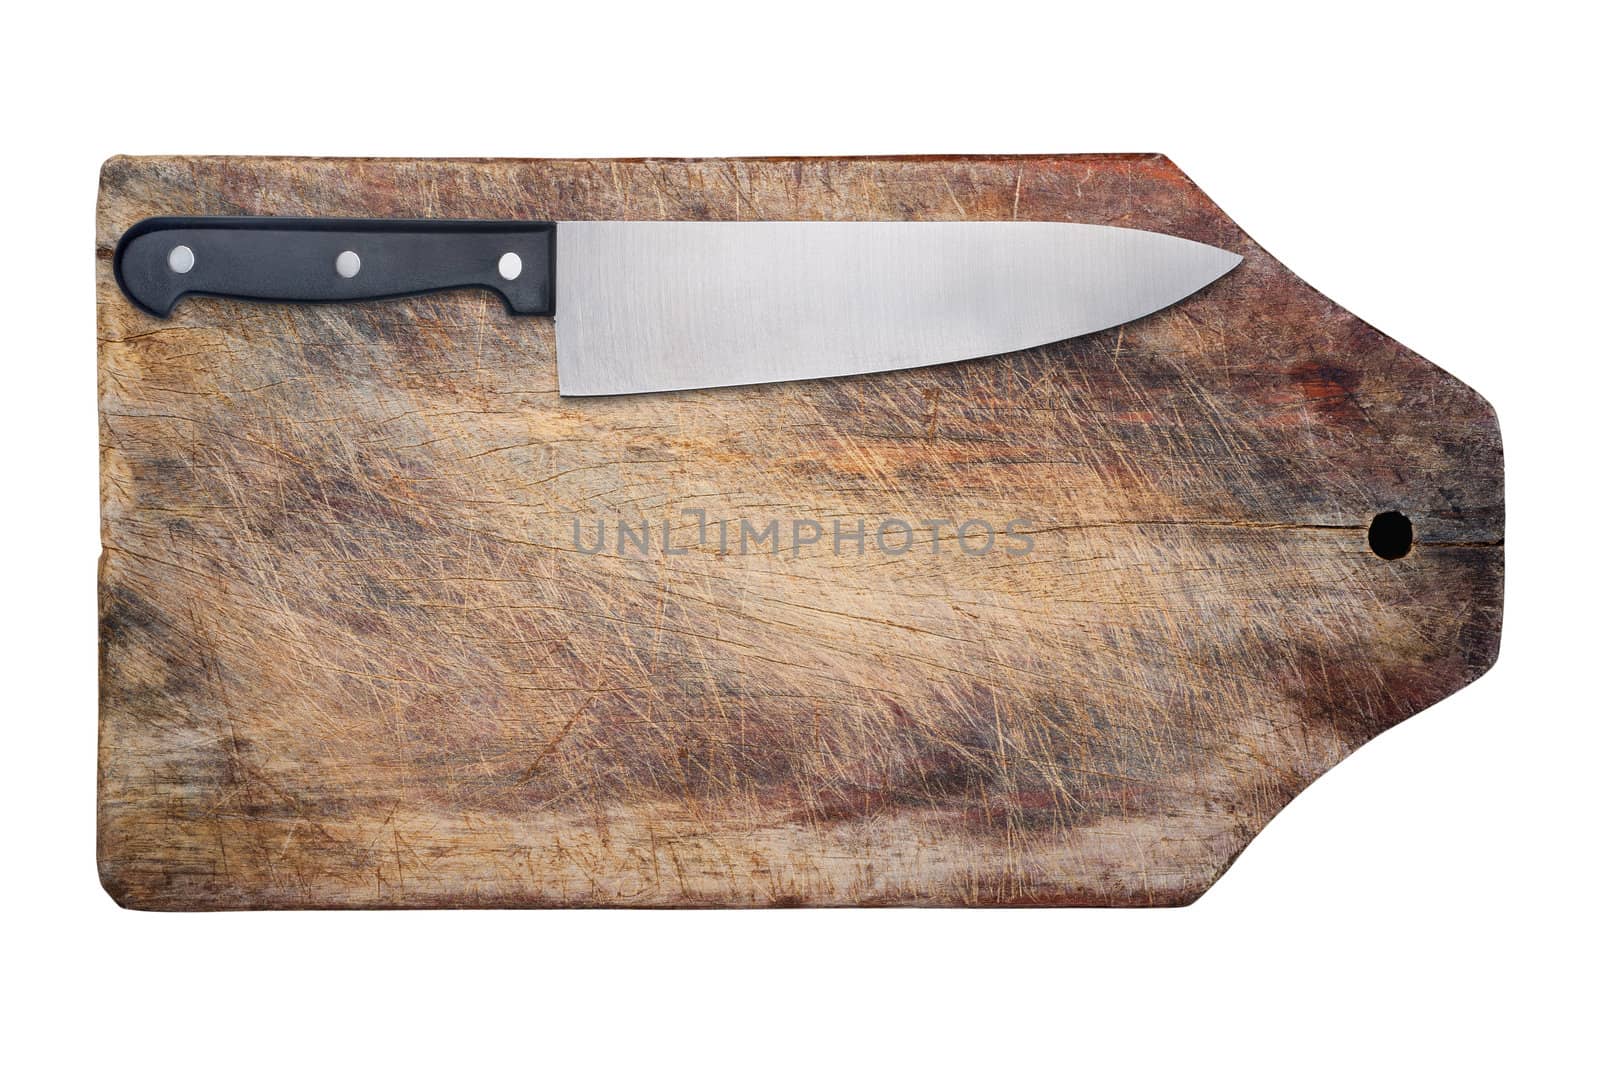 Kitchen knife on wooden table, isolated, copy space, clipping path.